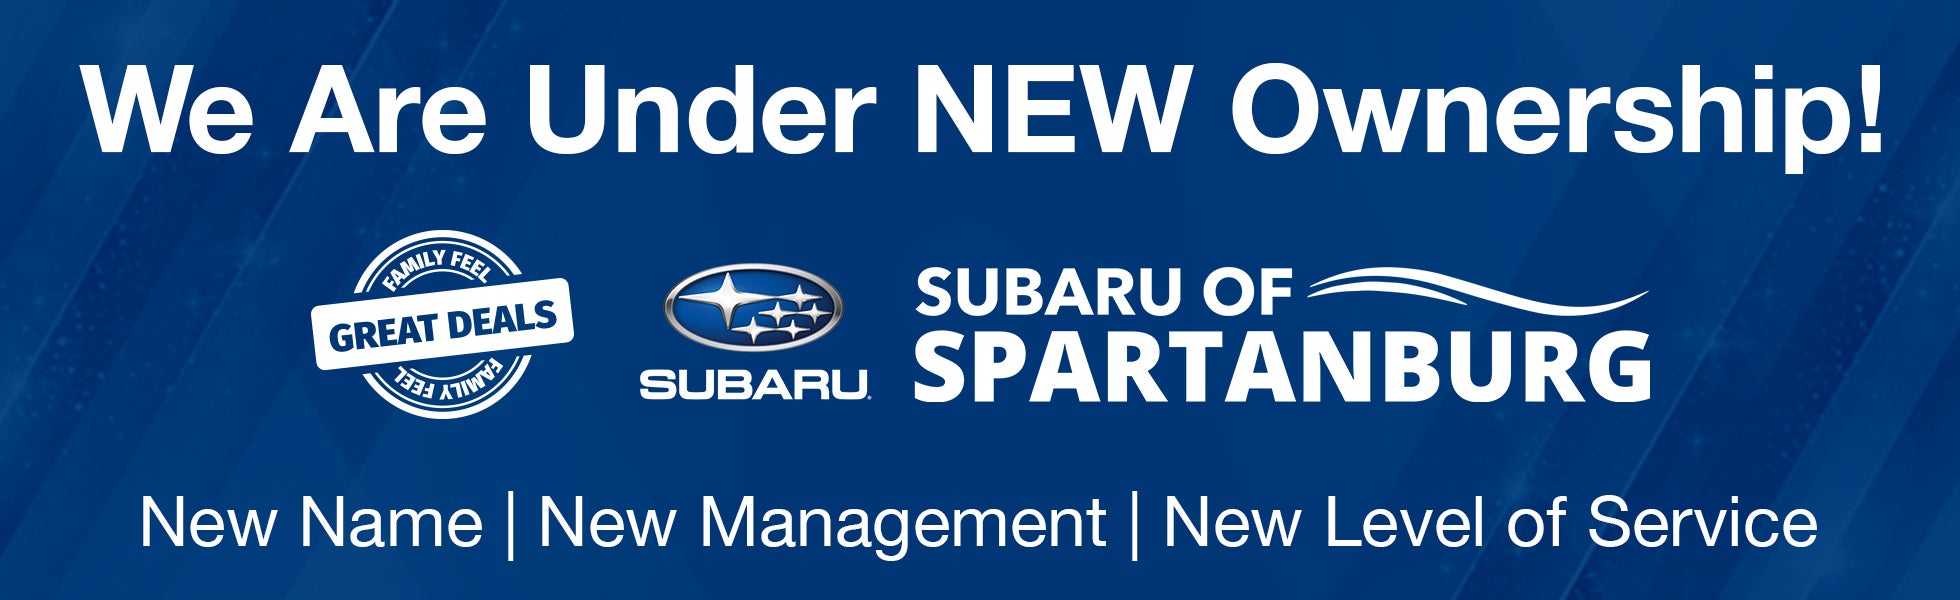 Under New Ownership graphic for Subaru of Spartanburg